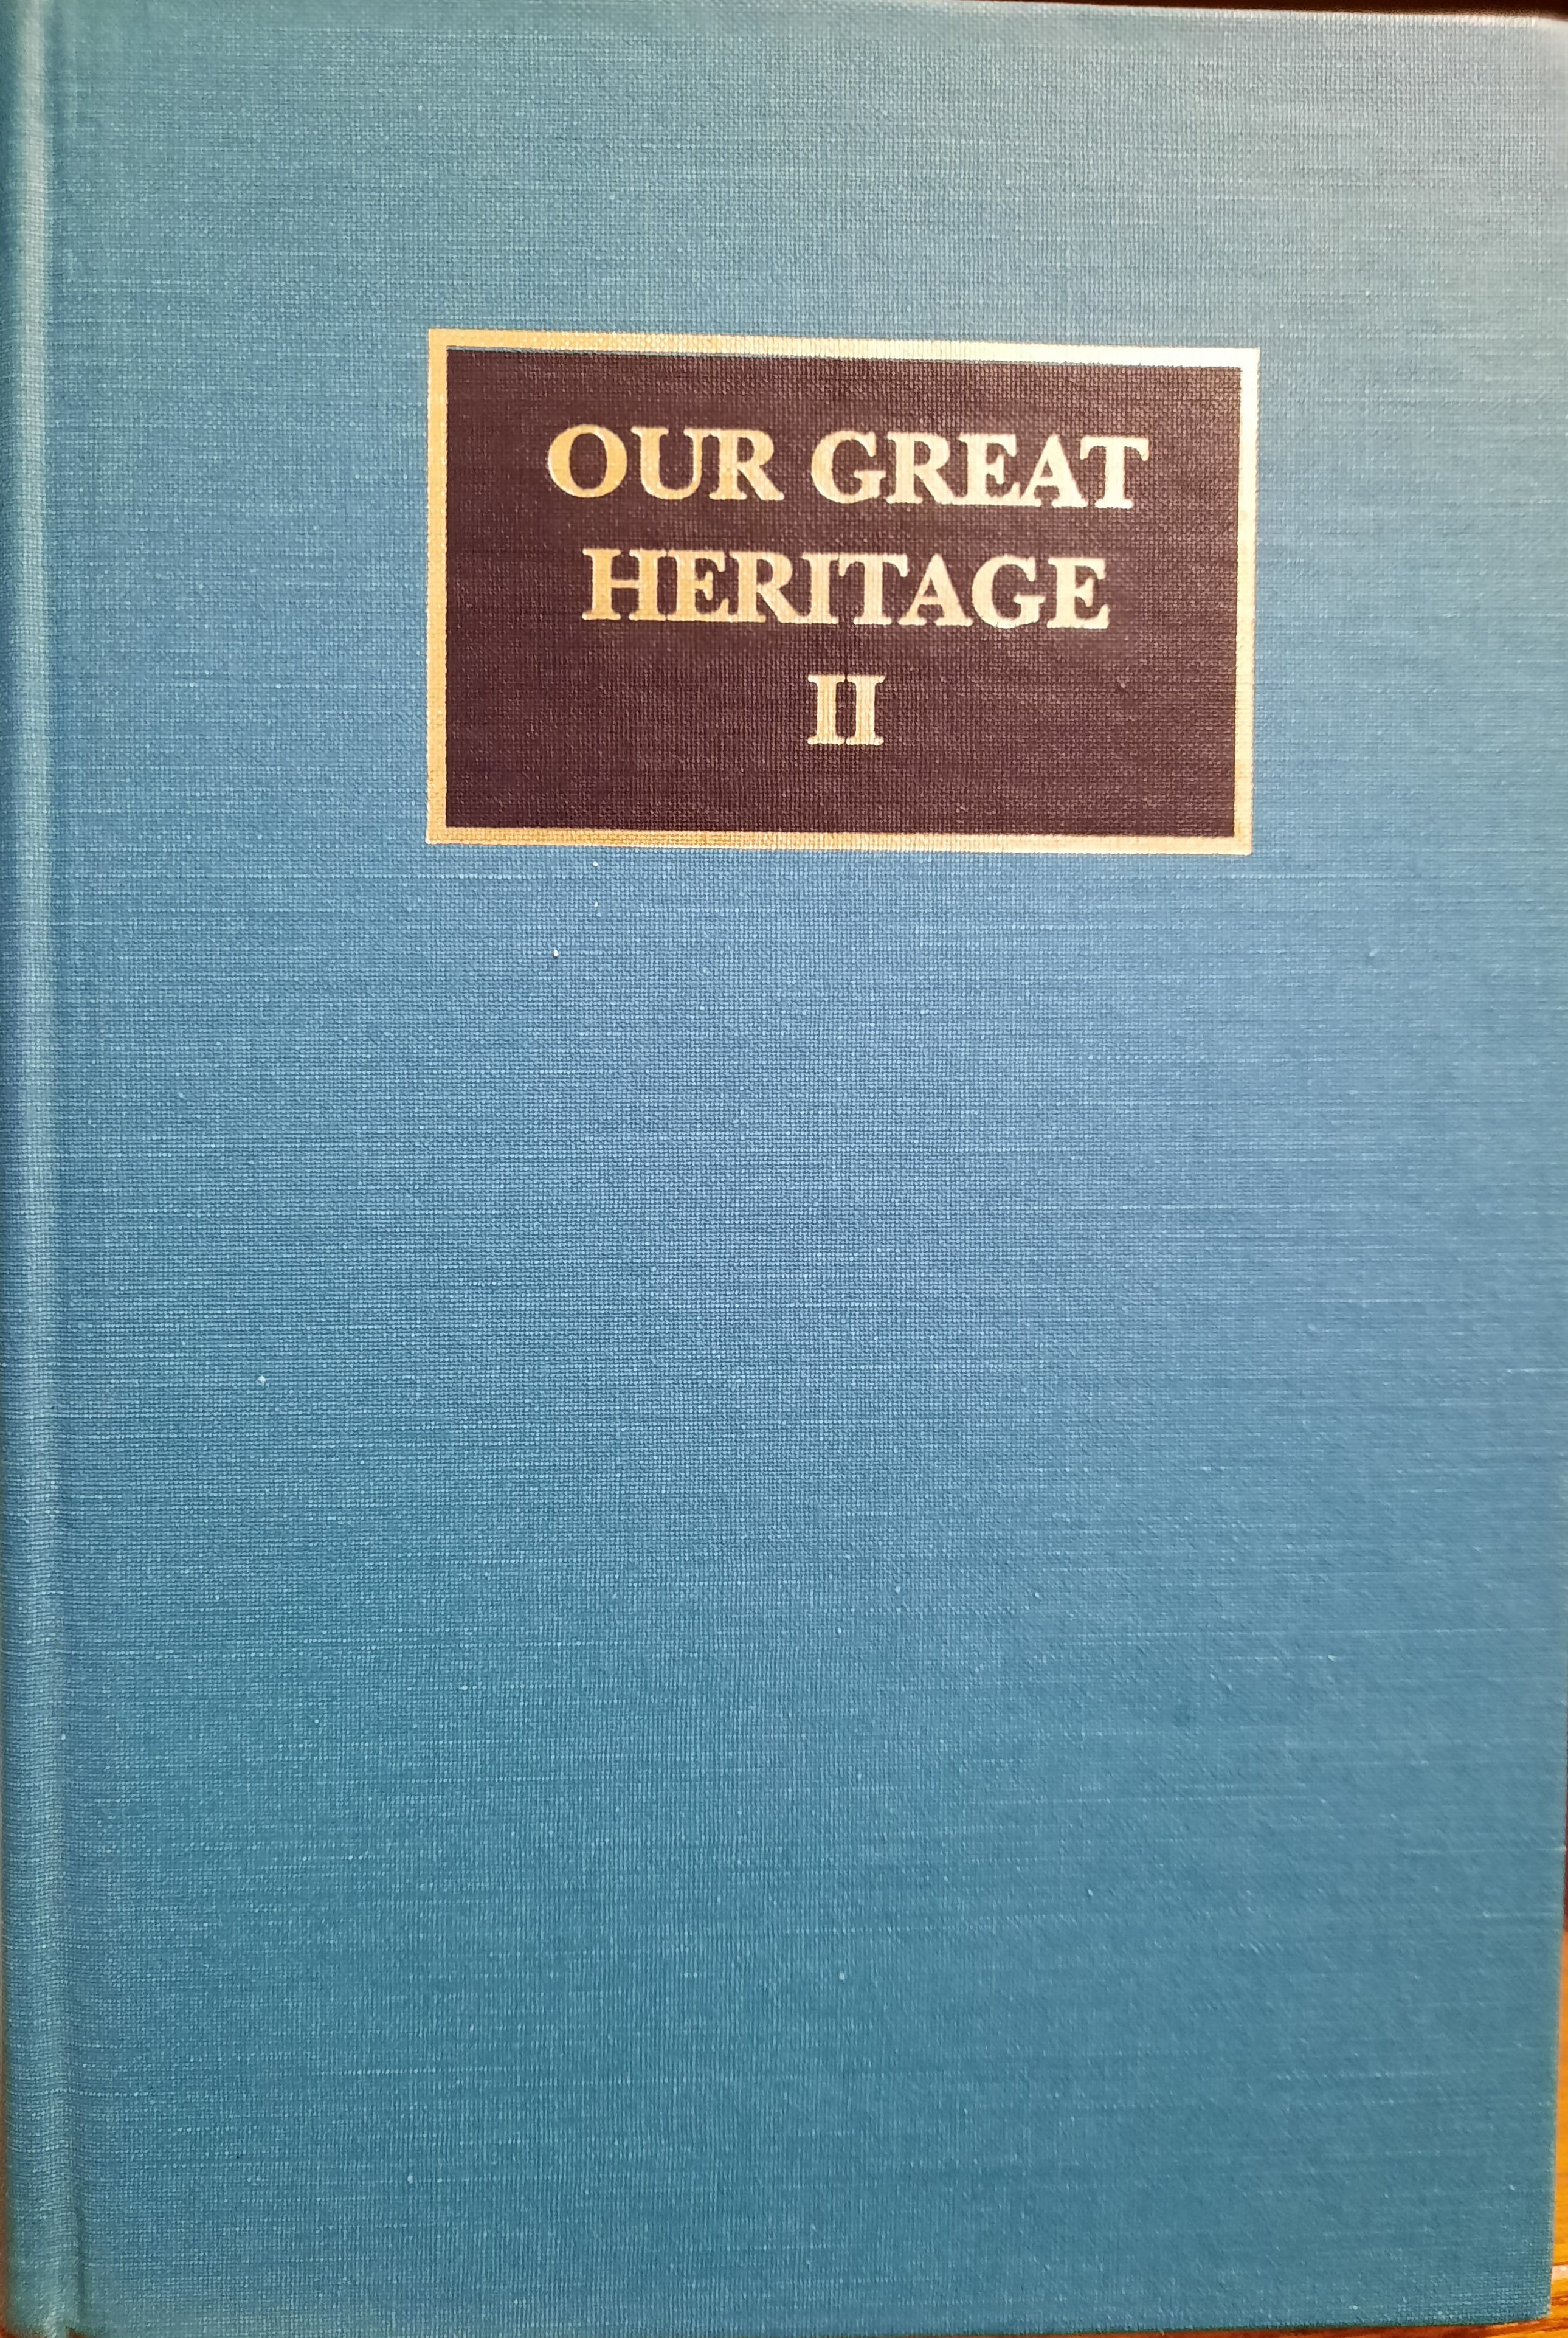 Our Great Heritage Vol. 2